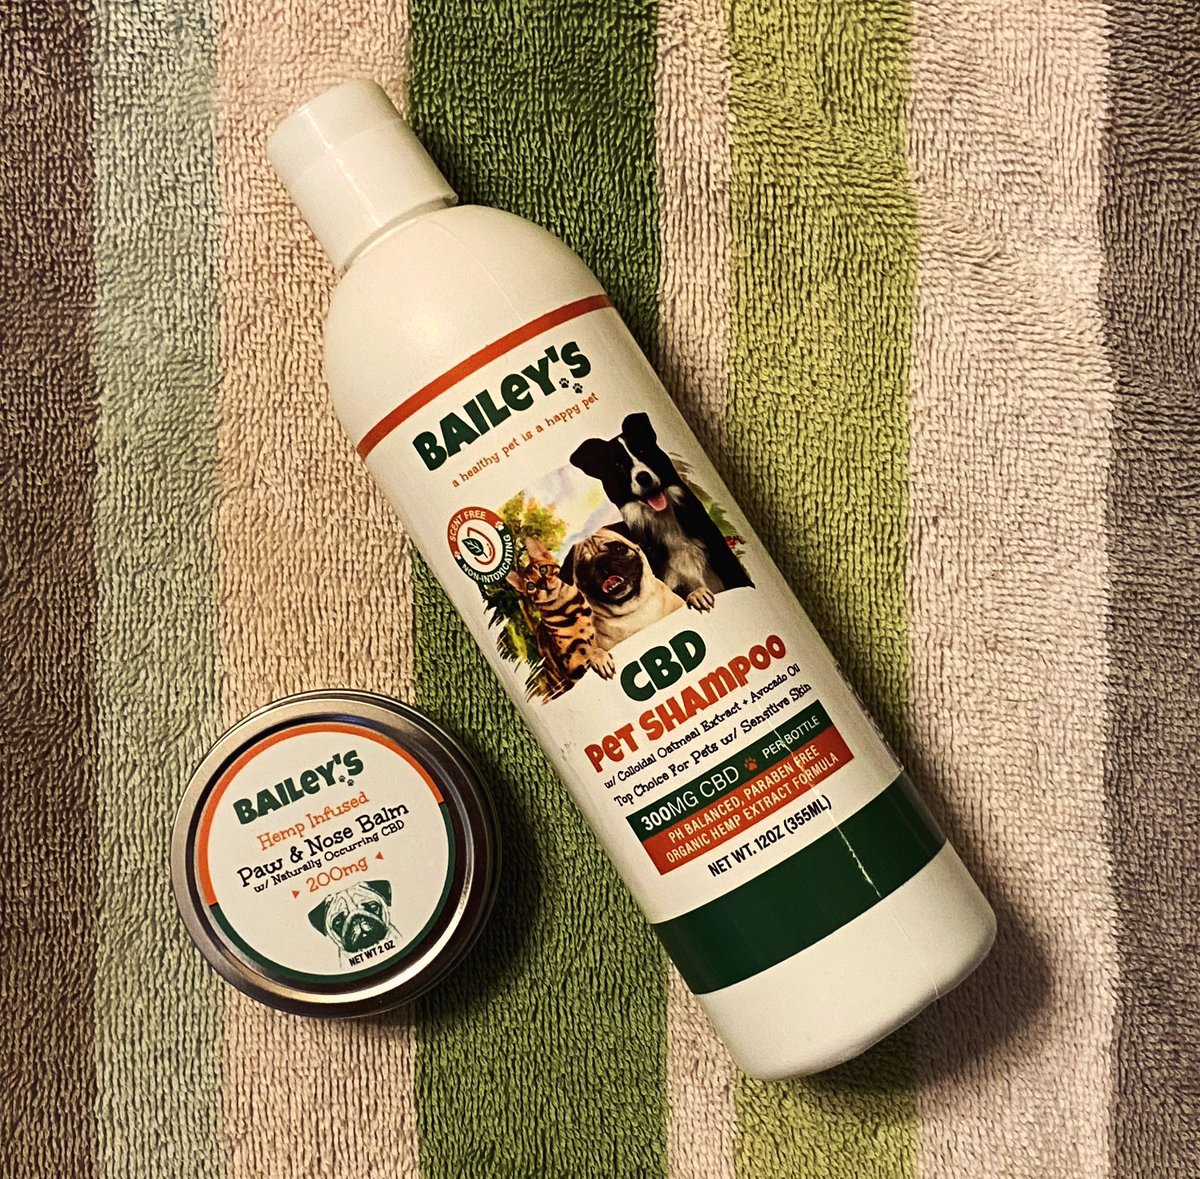 Pet wellness is always on our mind! This week we'll be giving away a @baileyscbd CBD Pet Shampoo and Paw & Nose Balm! Visit Pet Age on IG for giveaway details so you can pamper your furry companion with these veterinarian-crafted CBD essentials! #pets #CBD #healthcare